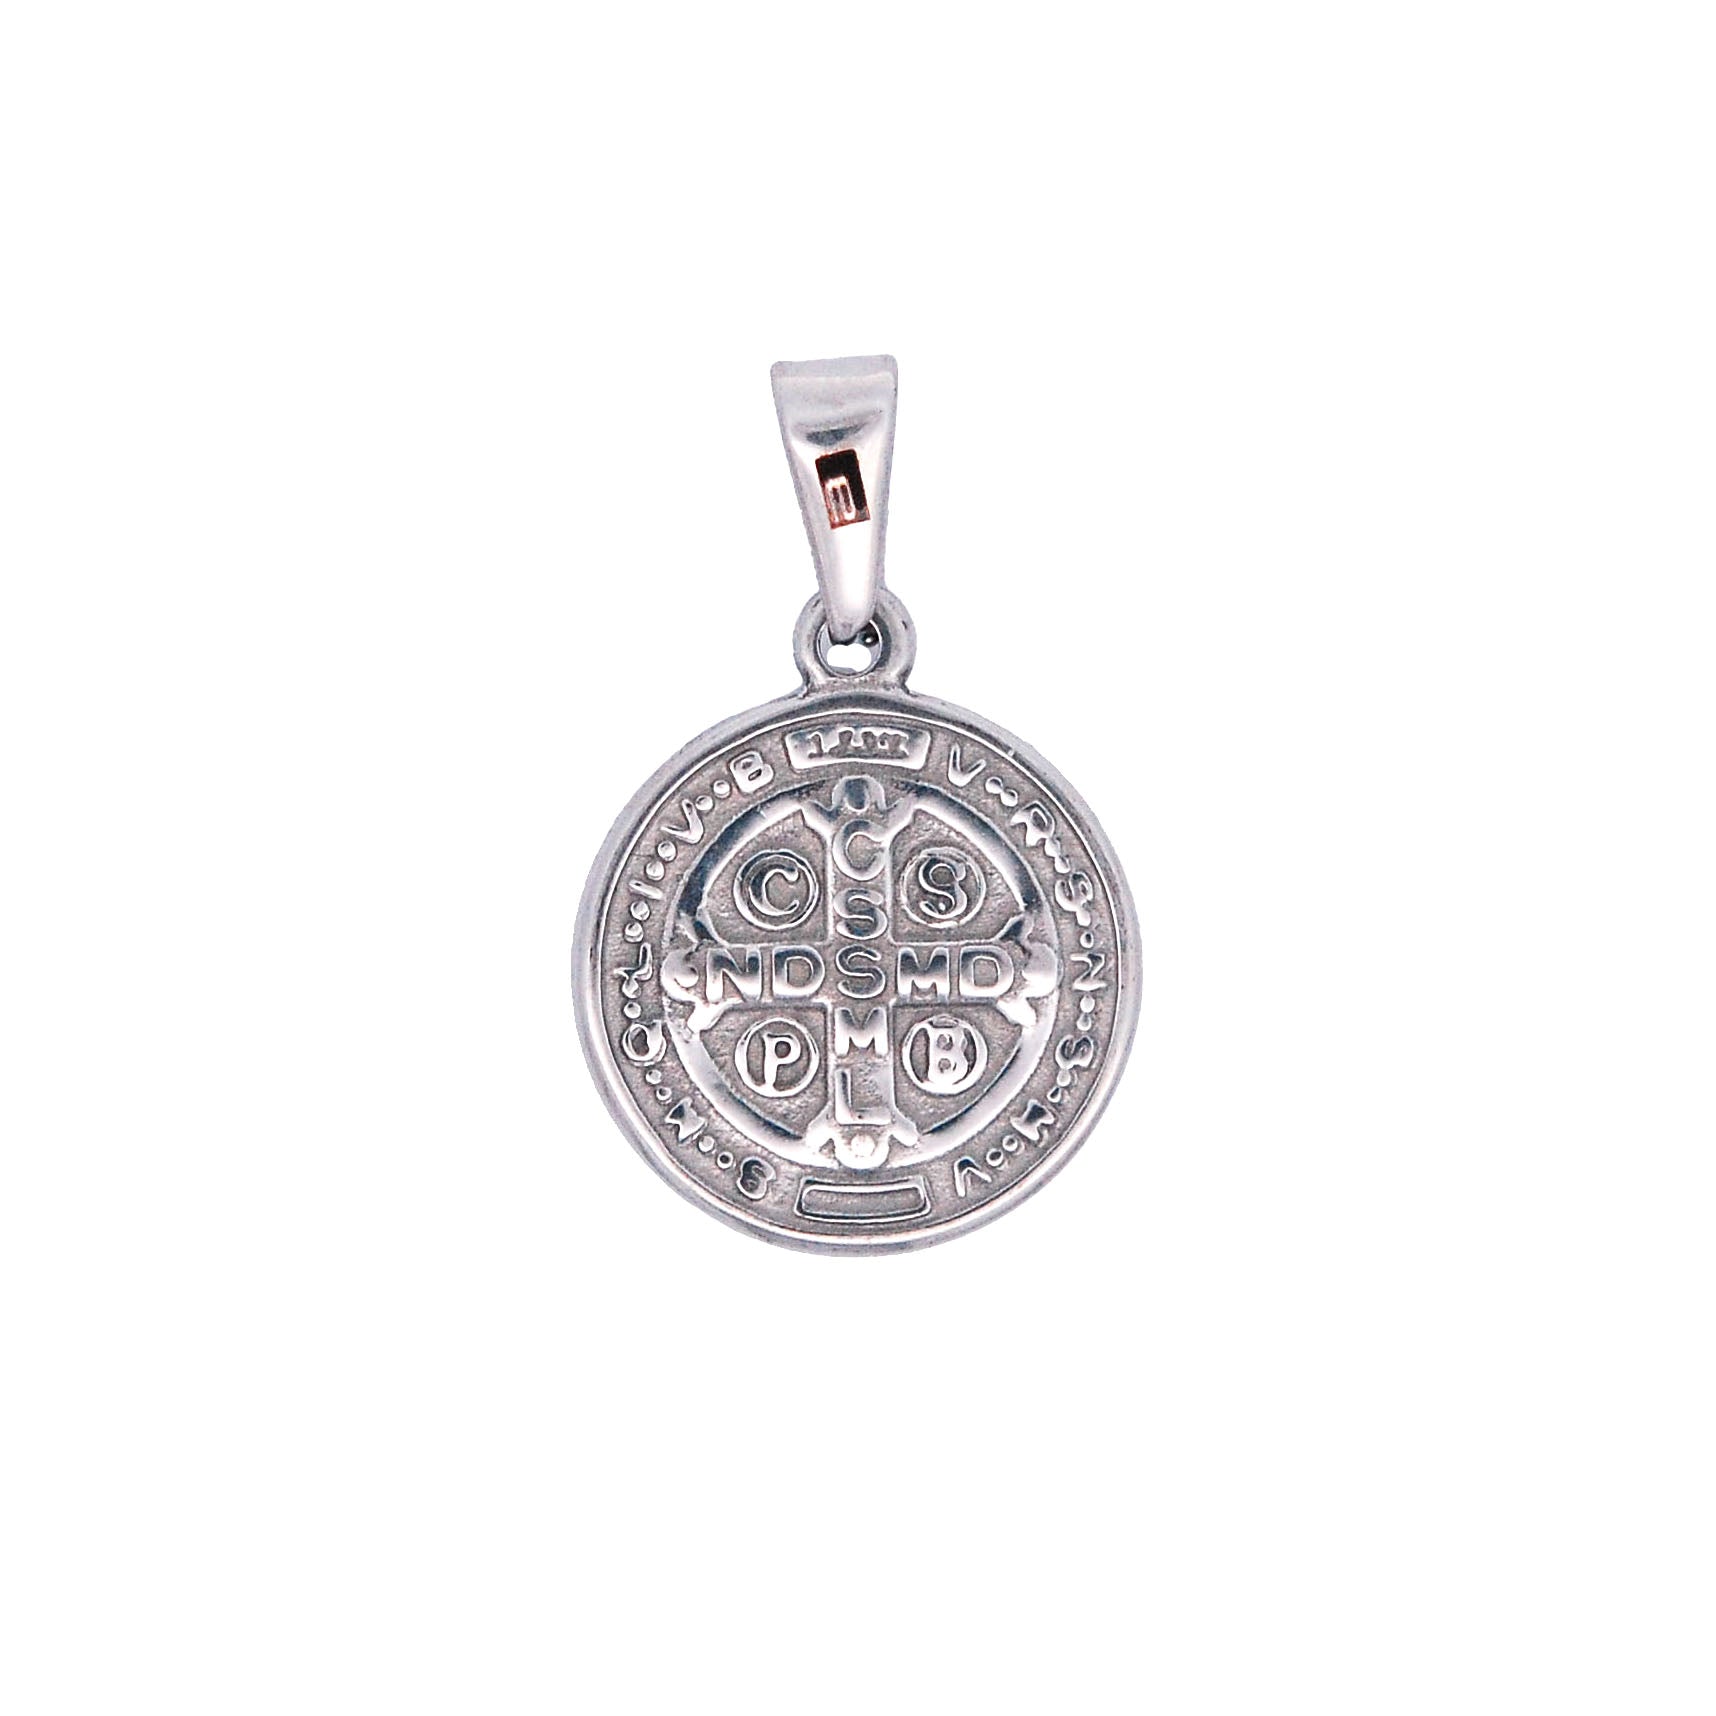 ESP 6766: Double Sided Padre Pio Circle Pendant (17mm)